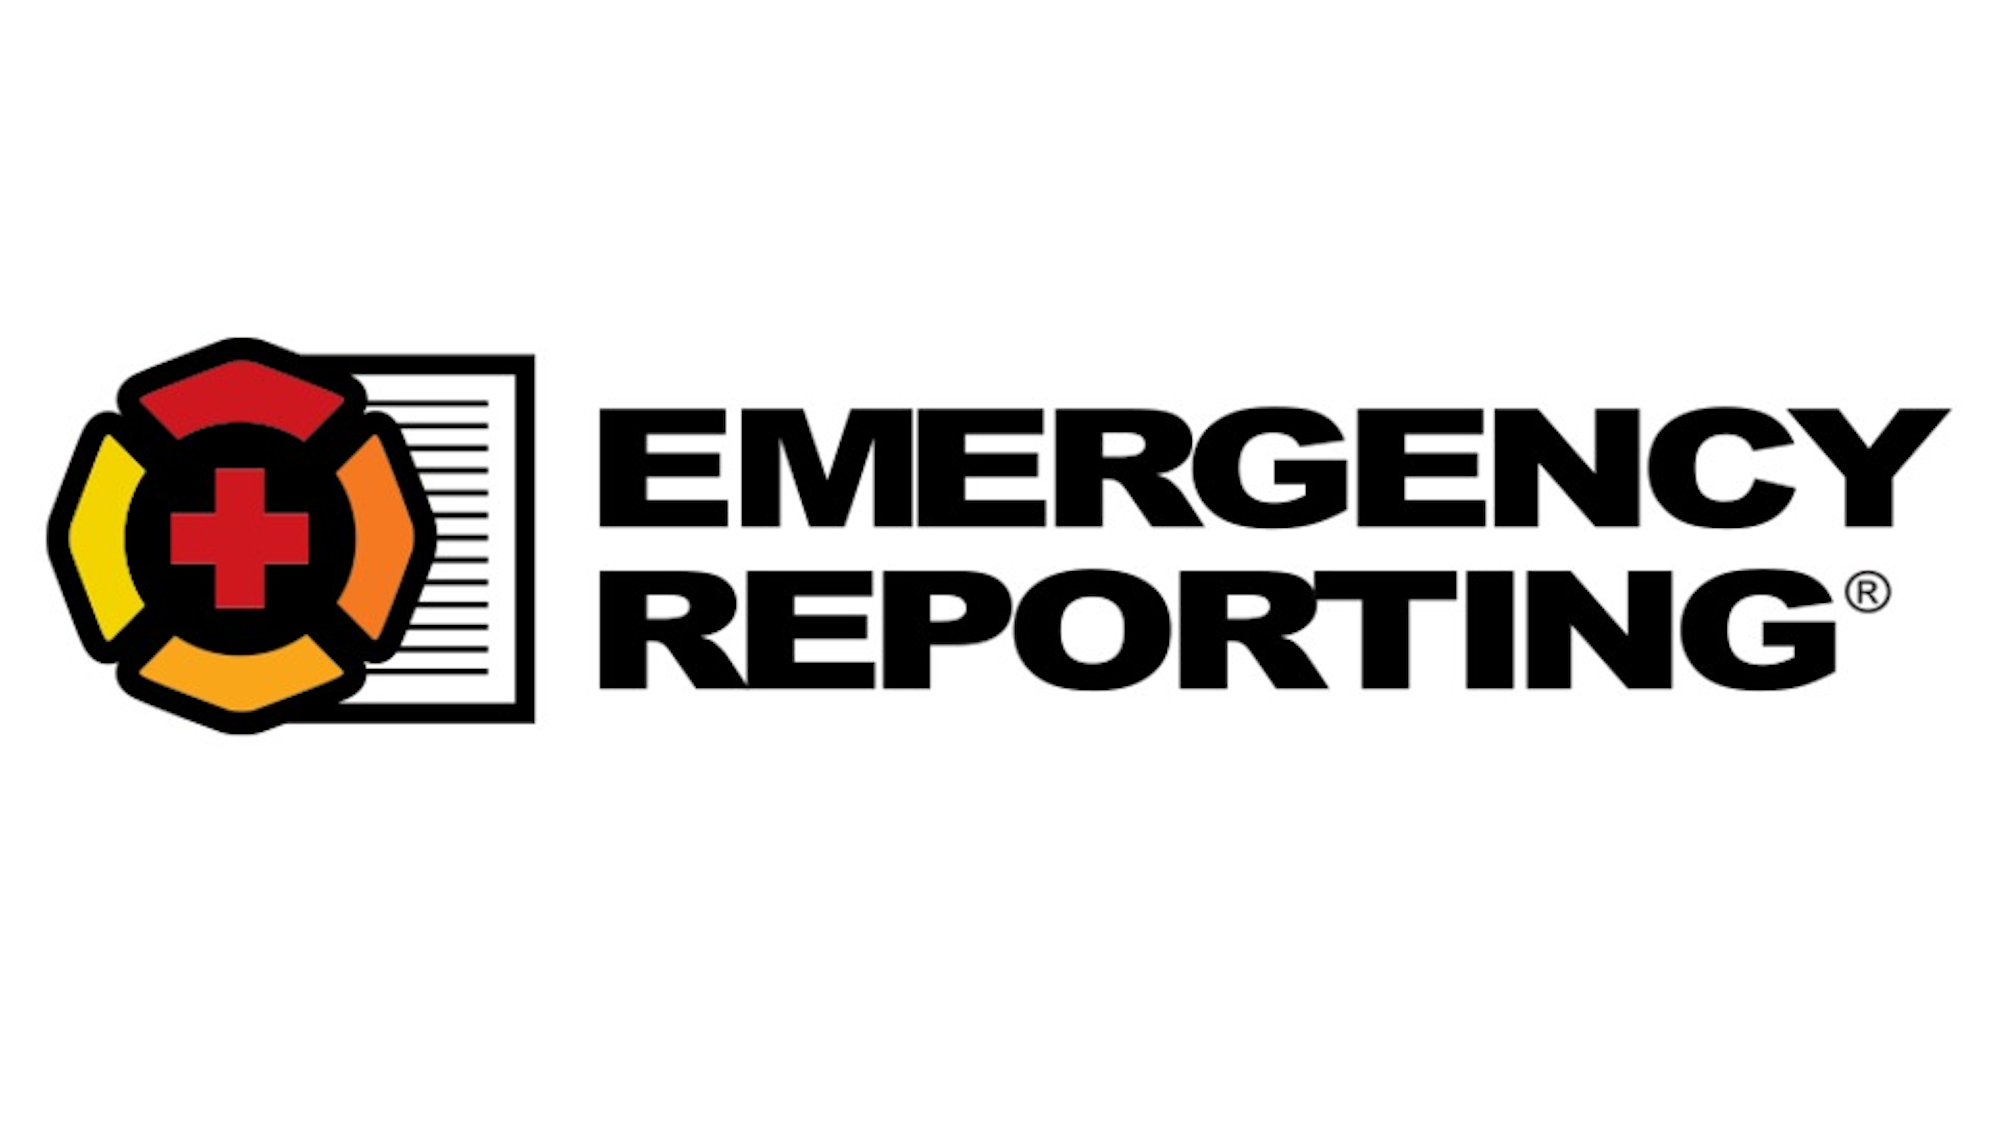 Emergency Reporting, FirstForward Announce Integration Firehouse